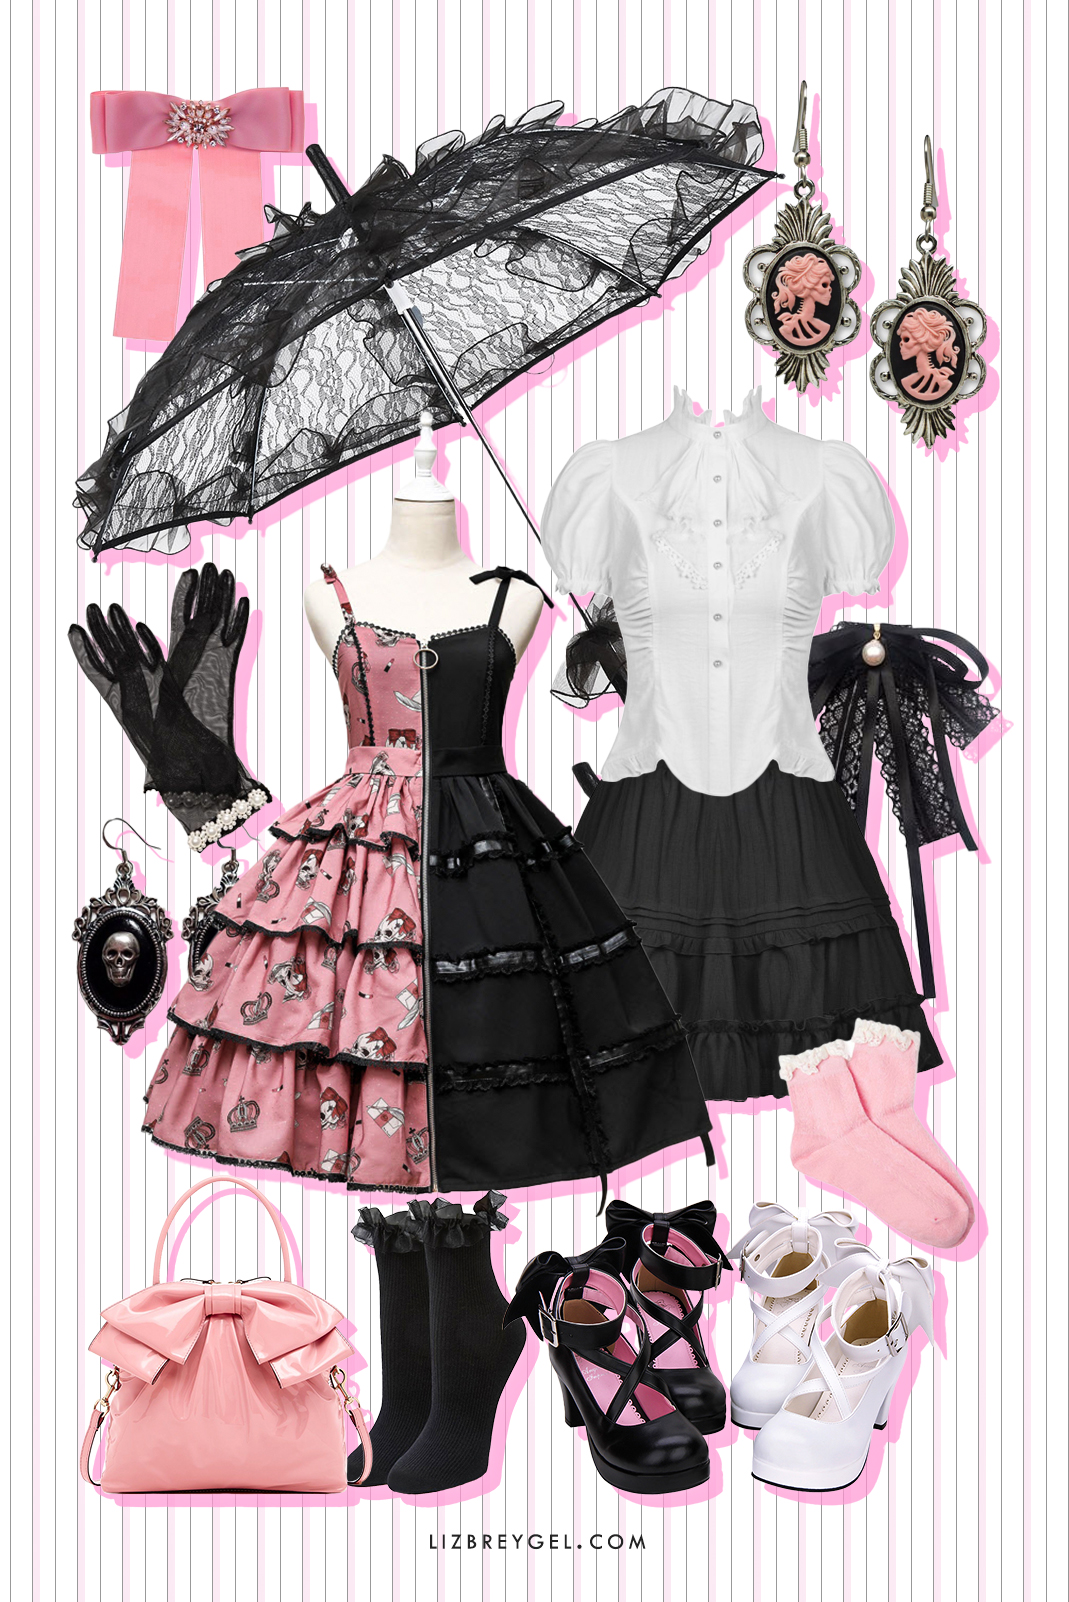 fashion collage with gothic lolita dress, skirt and accessories